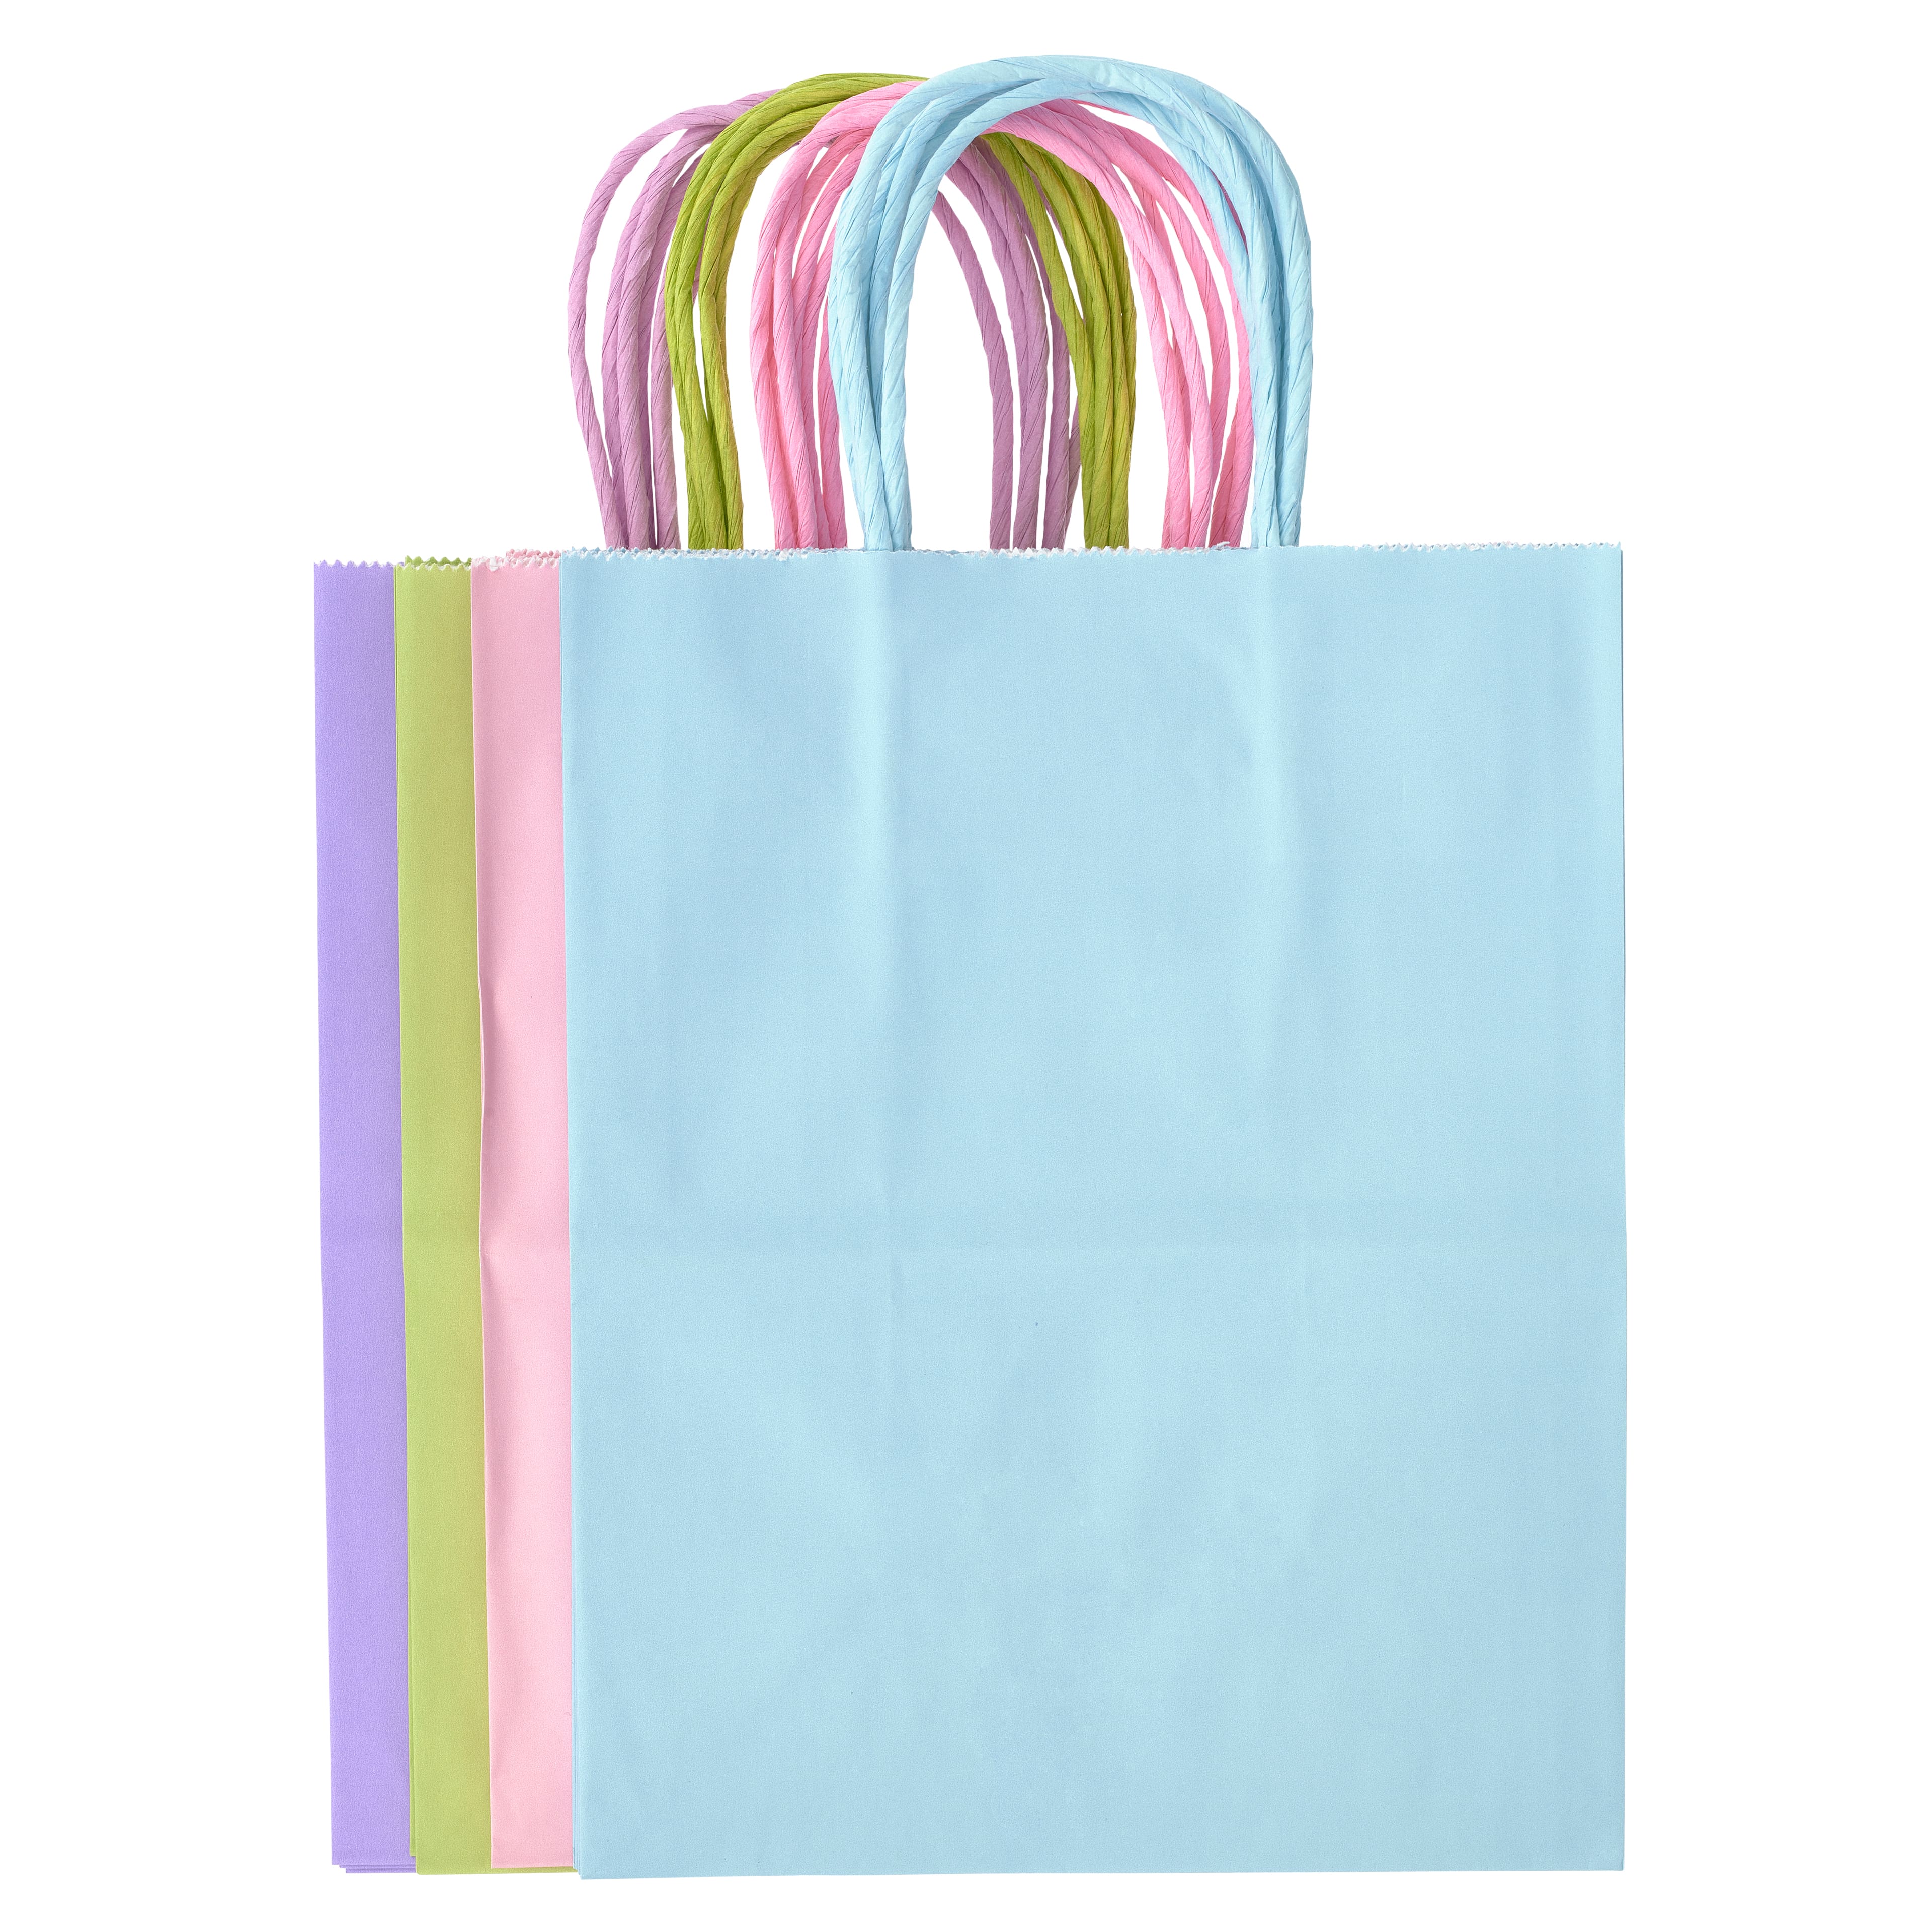 Assorted Pastel Colors Gifting Medium Bags by Celebrate It | 8 x 4.75 x 10 | Michaels